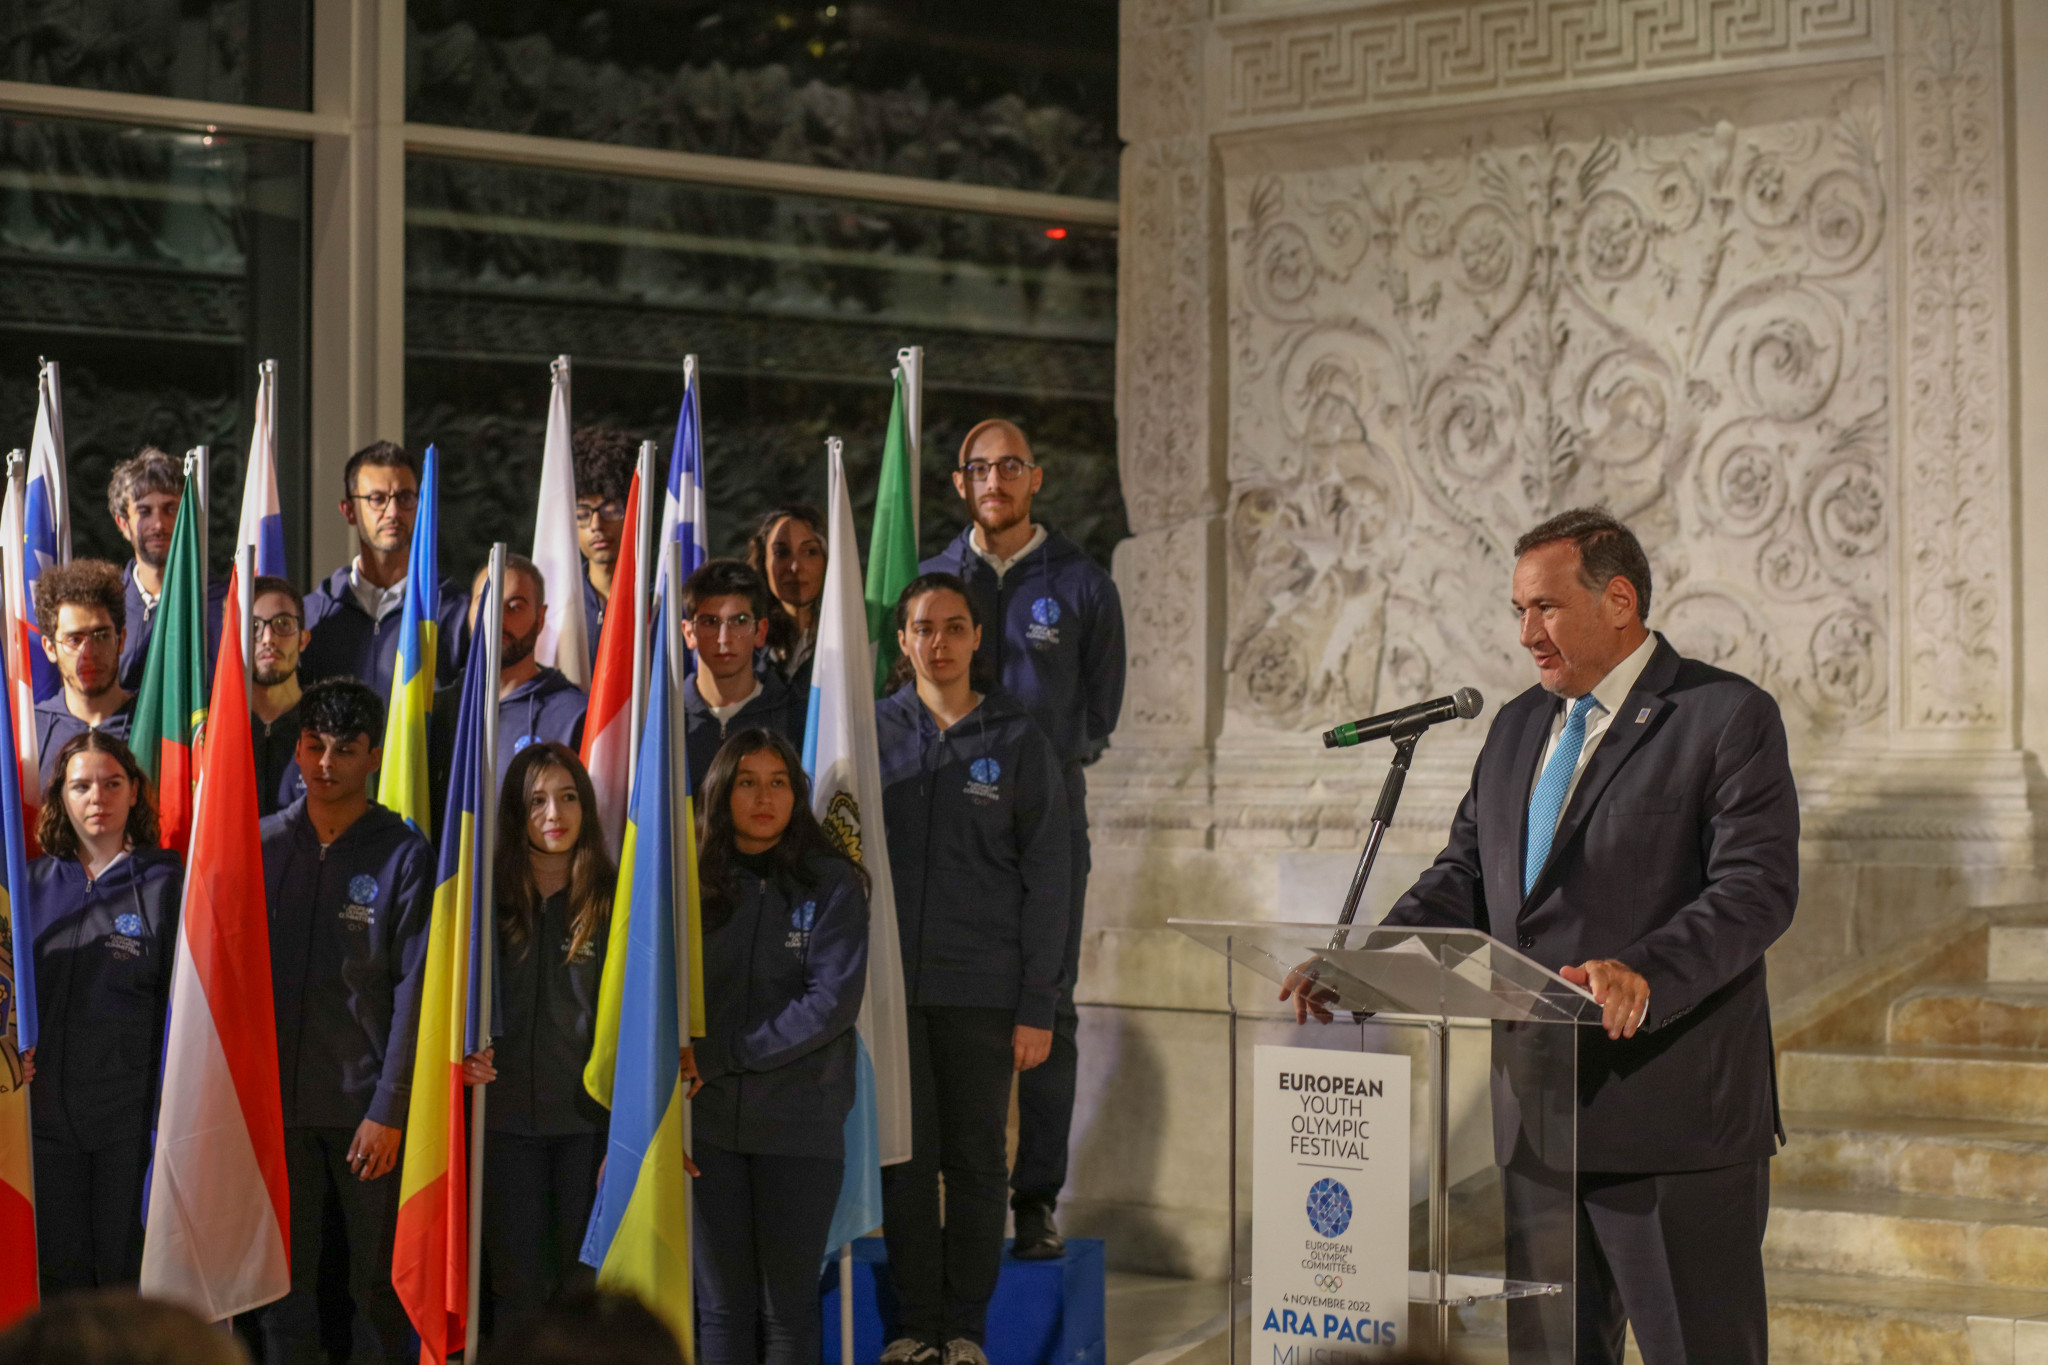 EOC President Spyros Capralos said EYOFs "provide the best youngsters from across the continent with vital experience" ©EOC